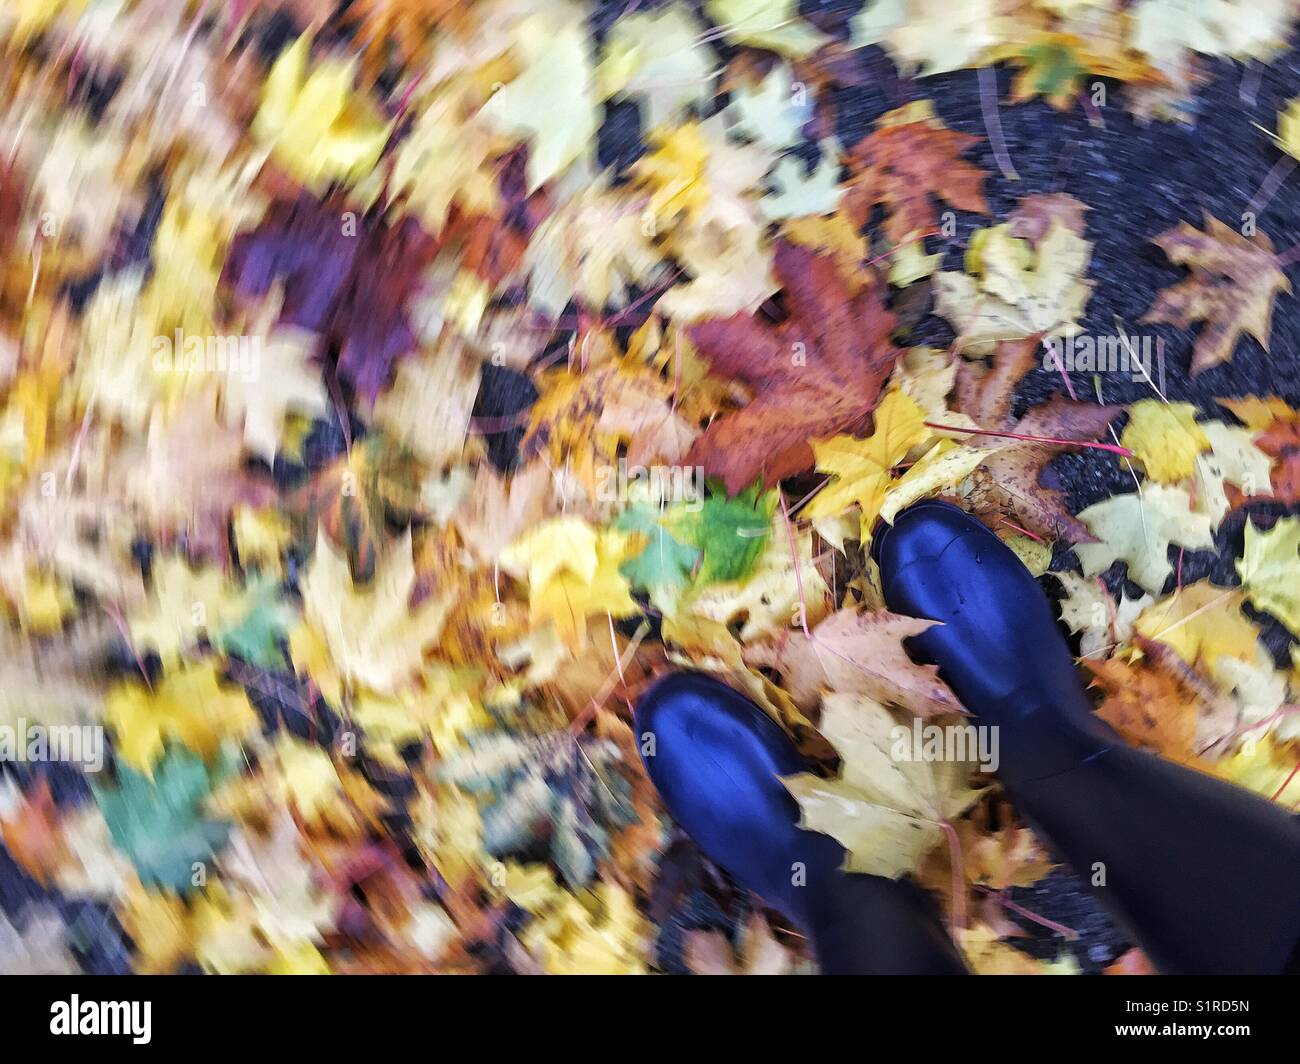 Fall colors leaves in movement under the feet in blue rubber boots Stock Photo